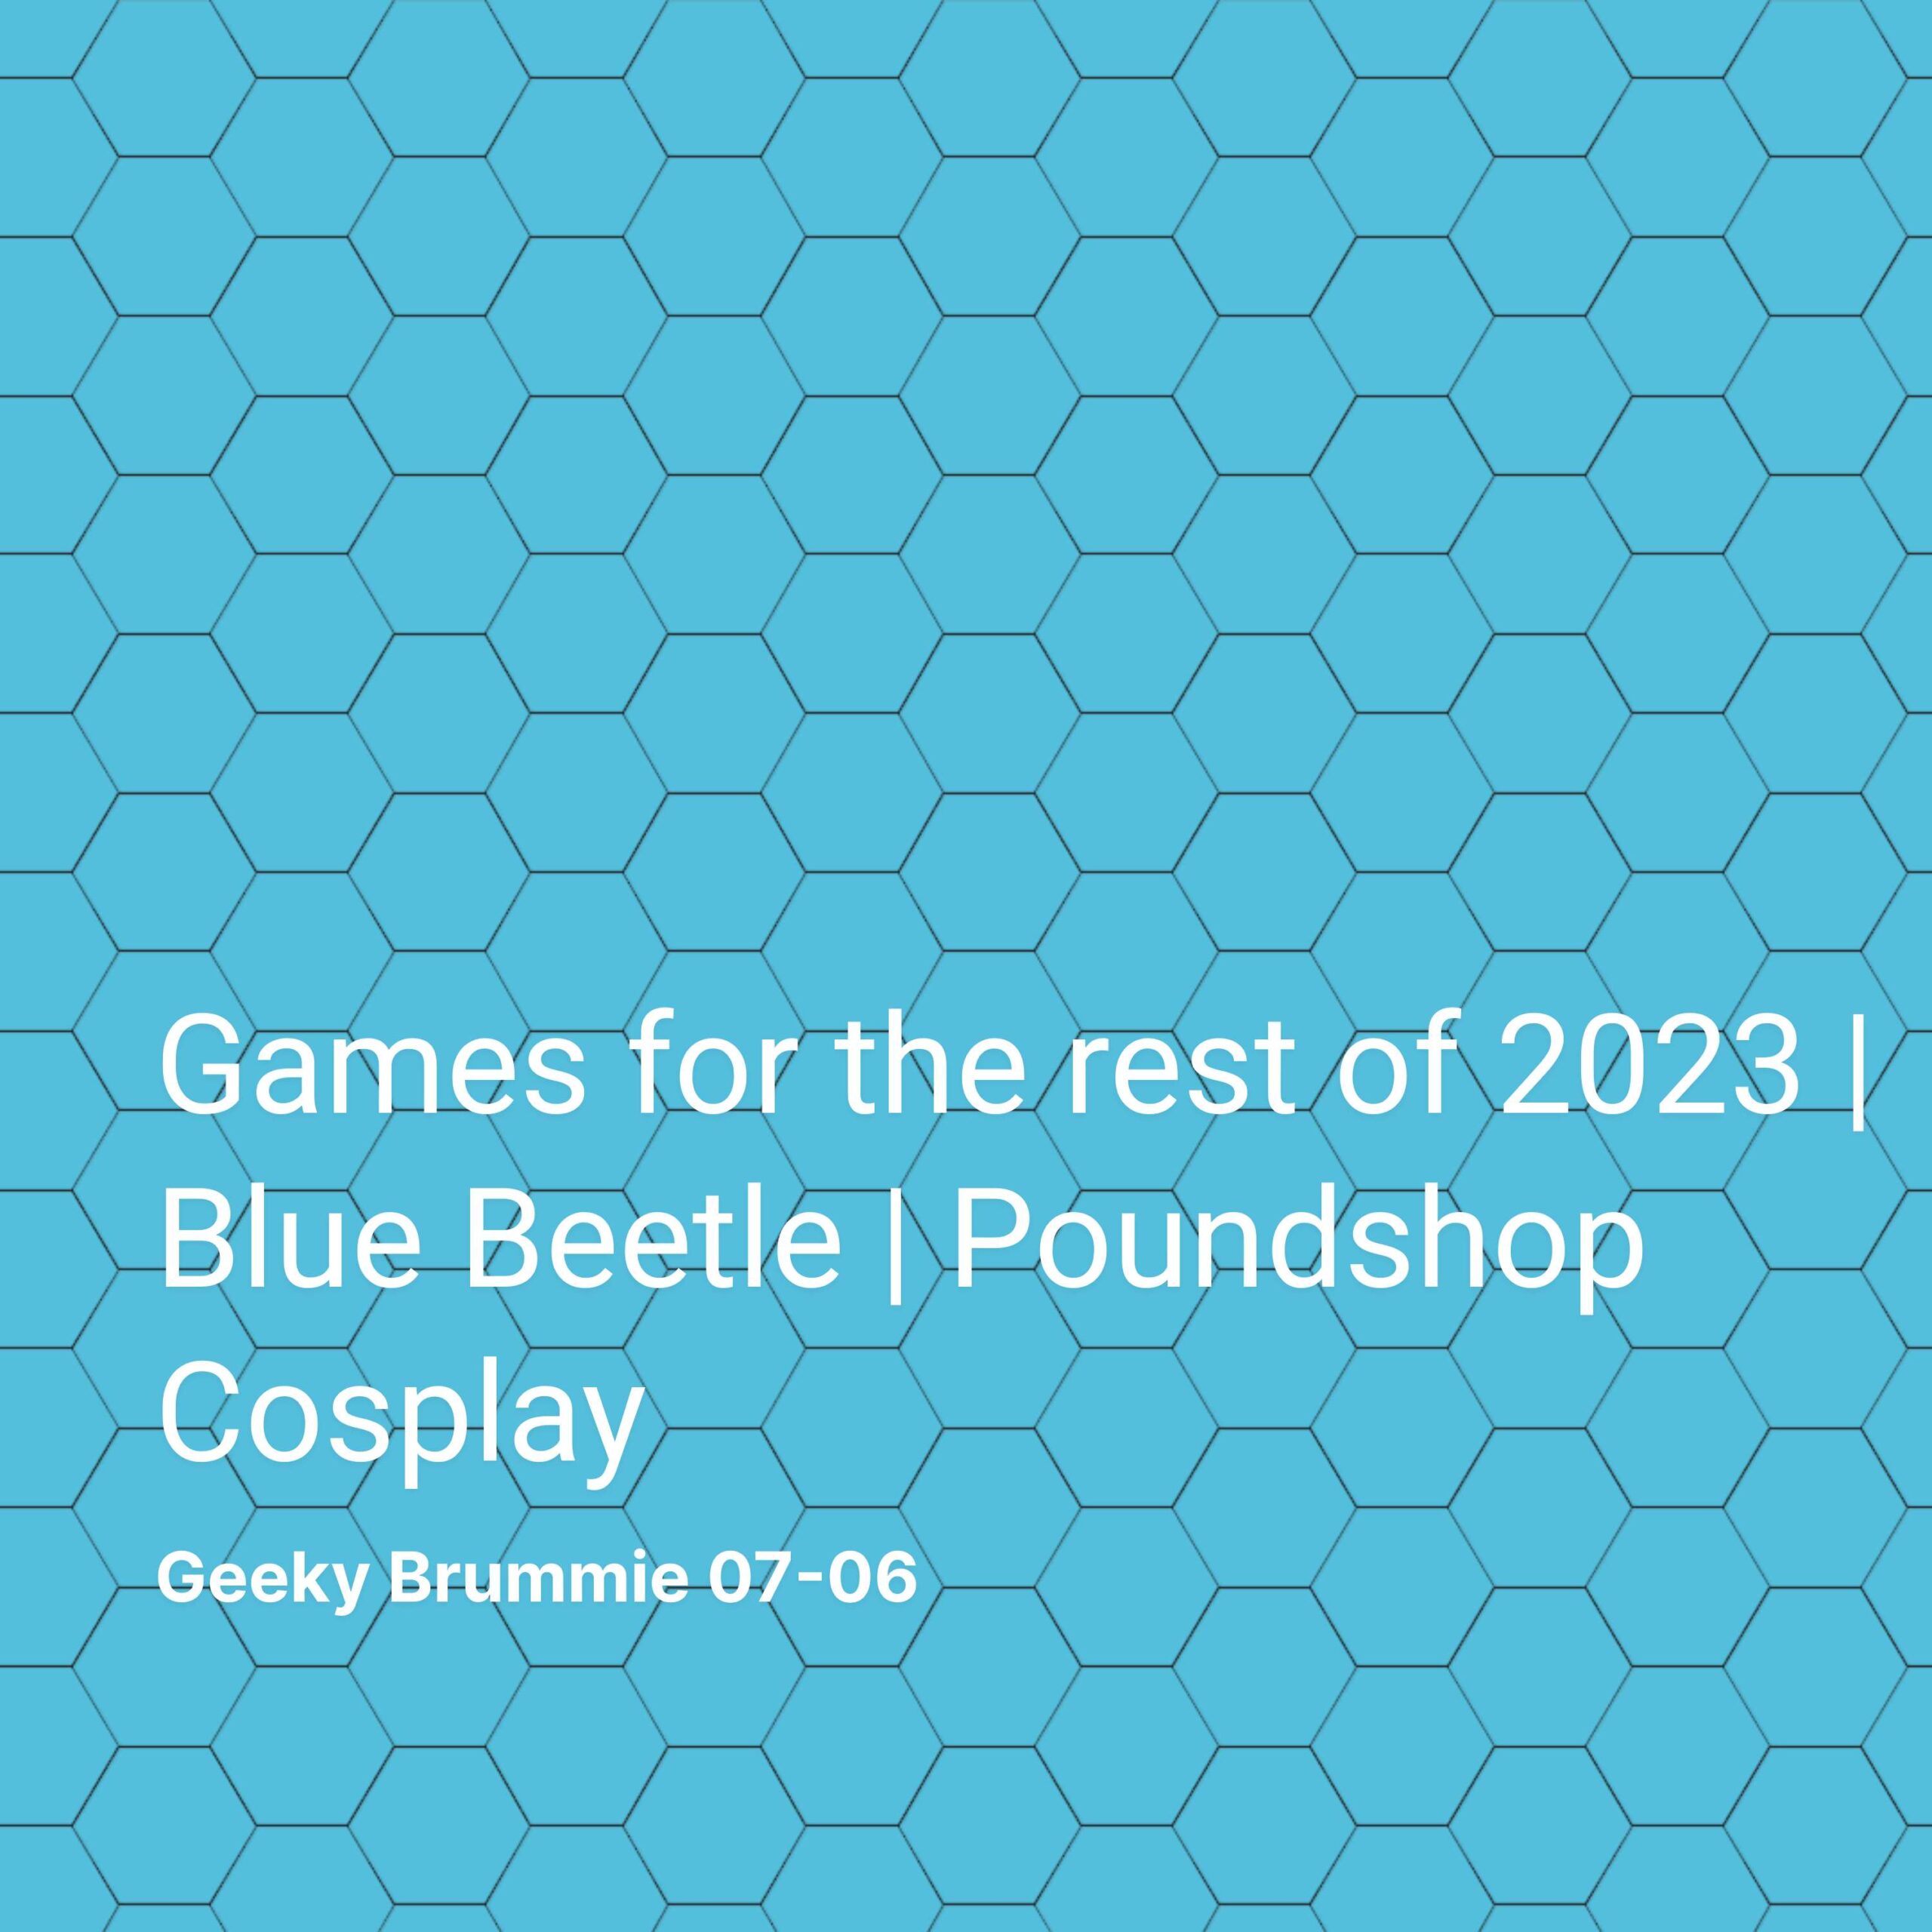 Games for the rest of 2023 | Blue Beetle | Poundshop Cosplay